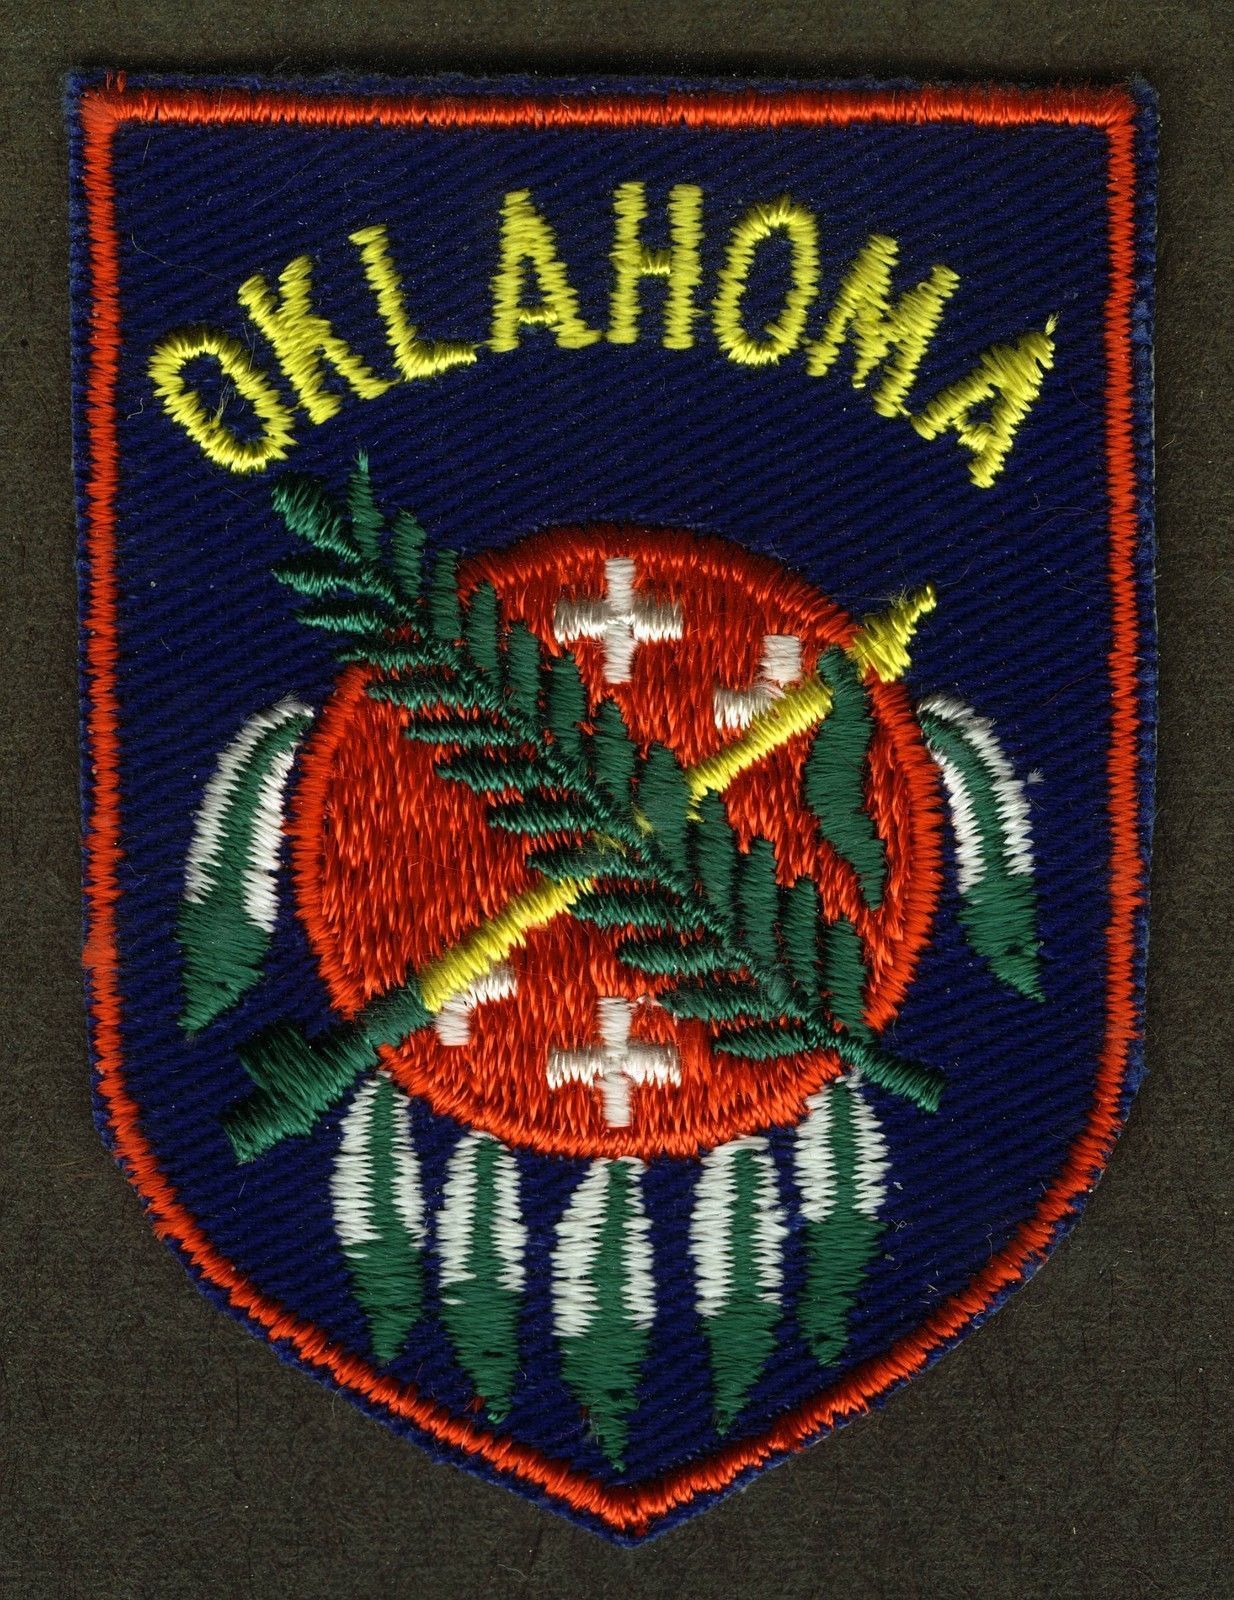 Primary image for VINTAGE OKLAHOMA EMBROIDERED CLOTH SOUVENIR TRAVEL PATCH